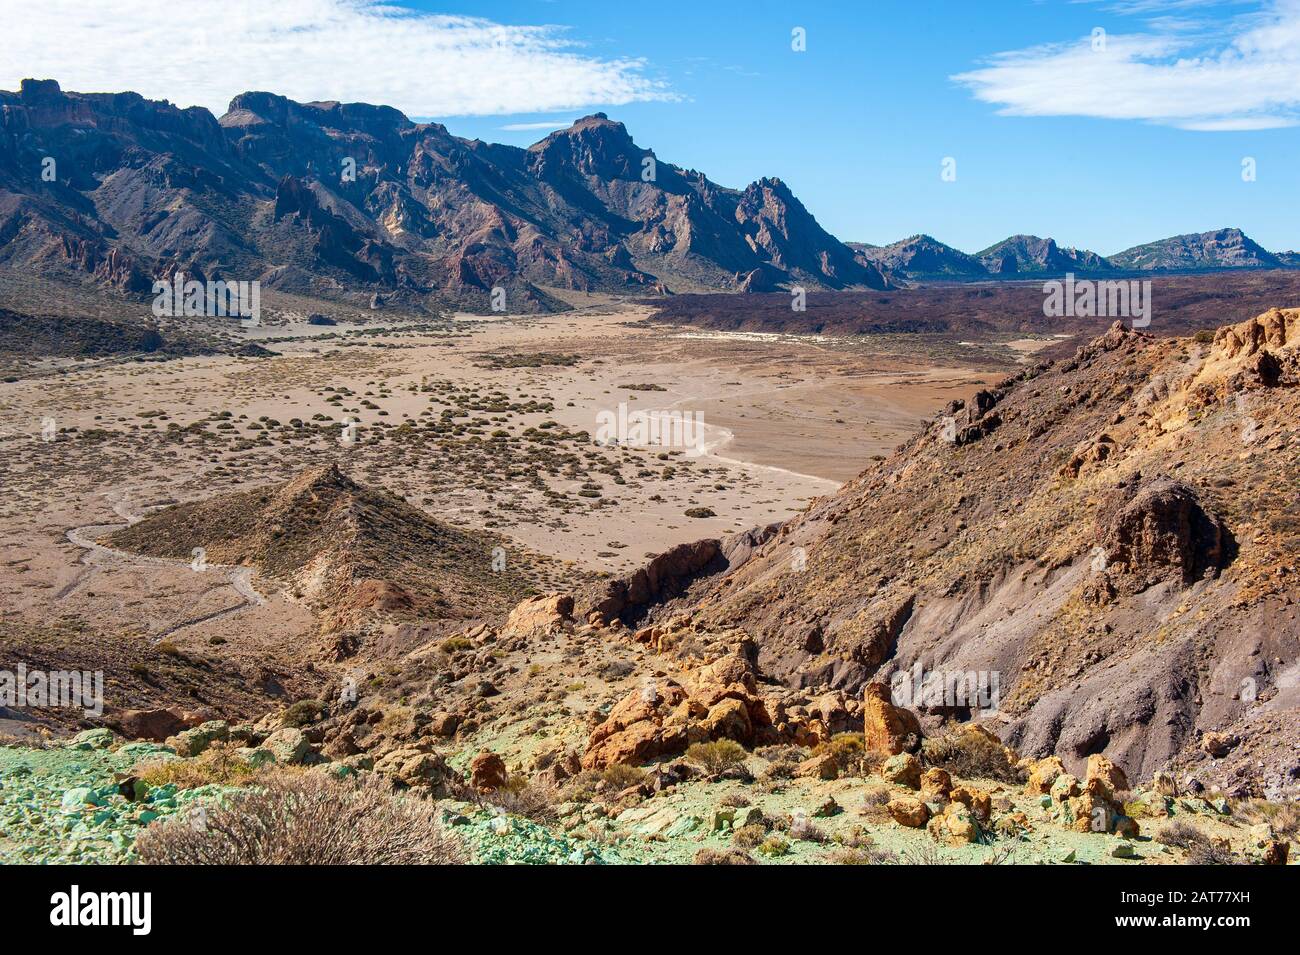 Teide national park on Canary Island Tenerife is the most popular destination for tourists. Stock Photo